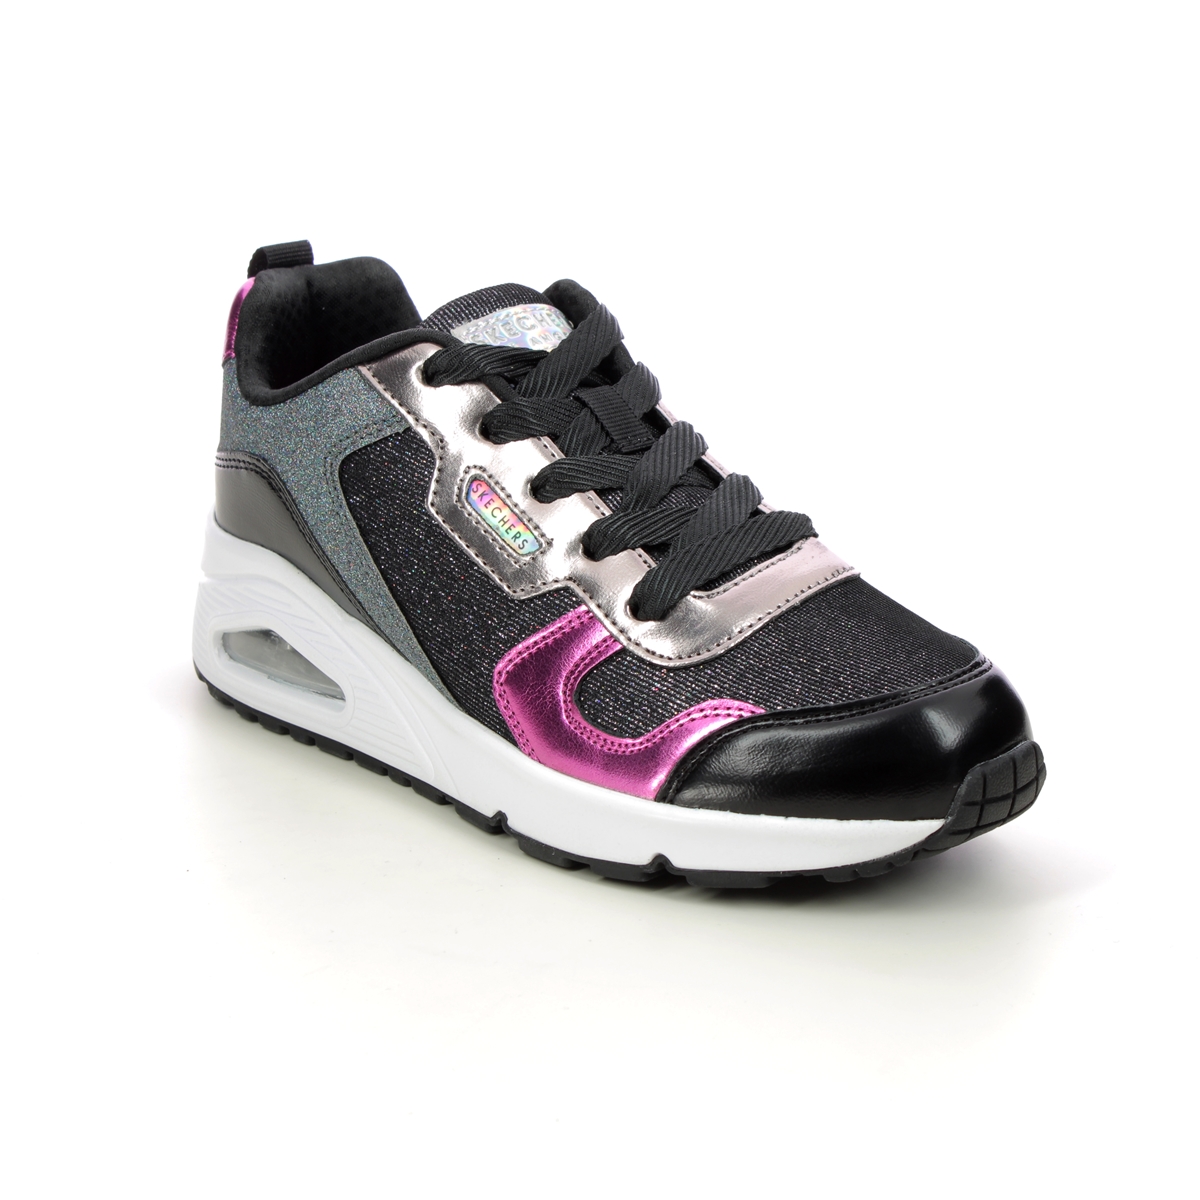 Skechers Uno Remix Lace Black Kids Girls Trainers 310513L In Size 36 In Plain Black For kids